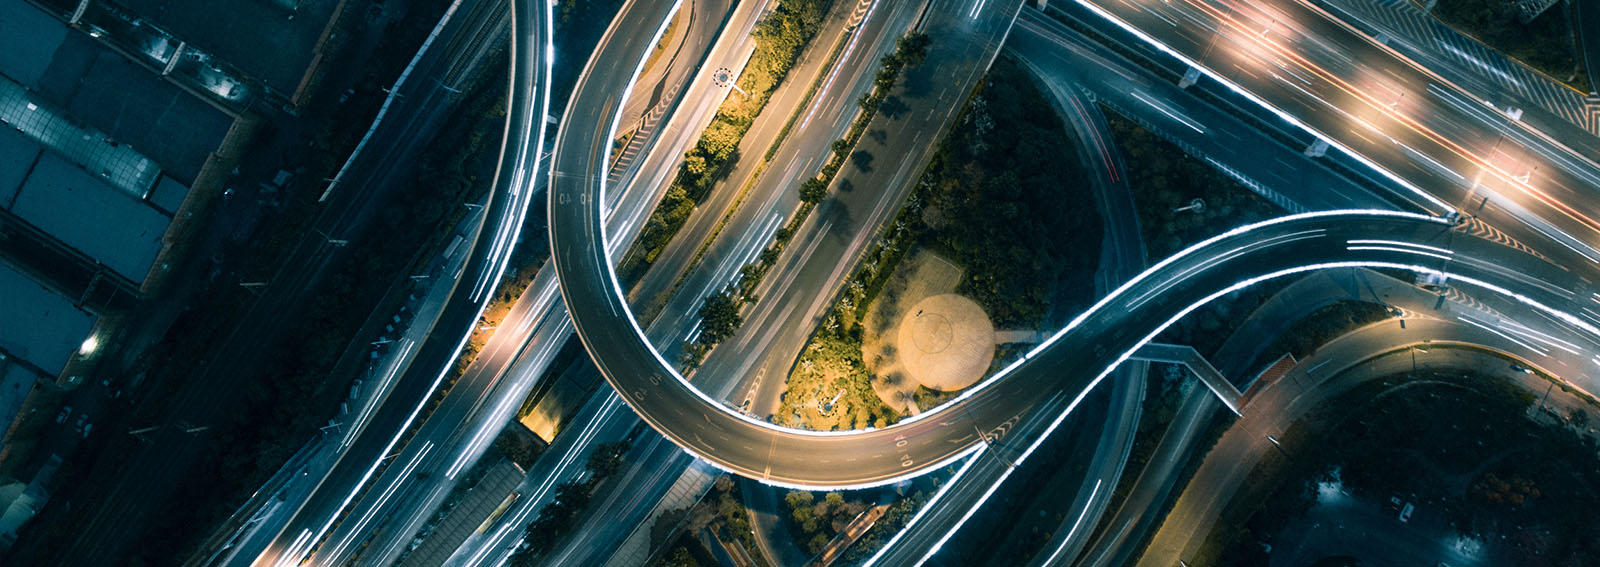 winding roads and overpasses with light trails